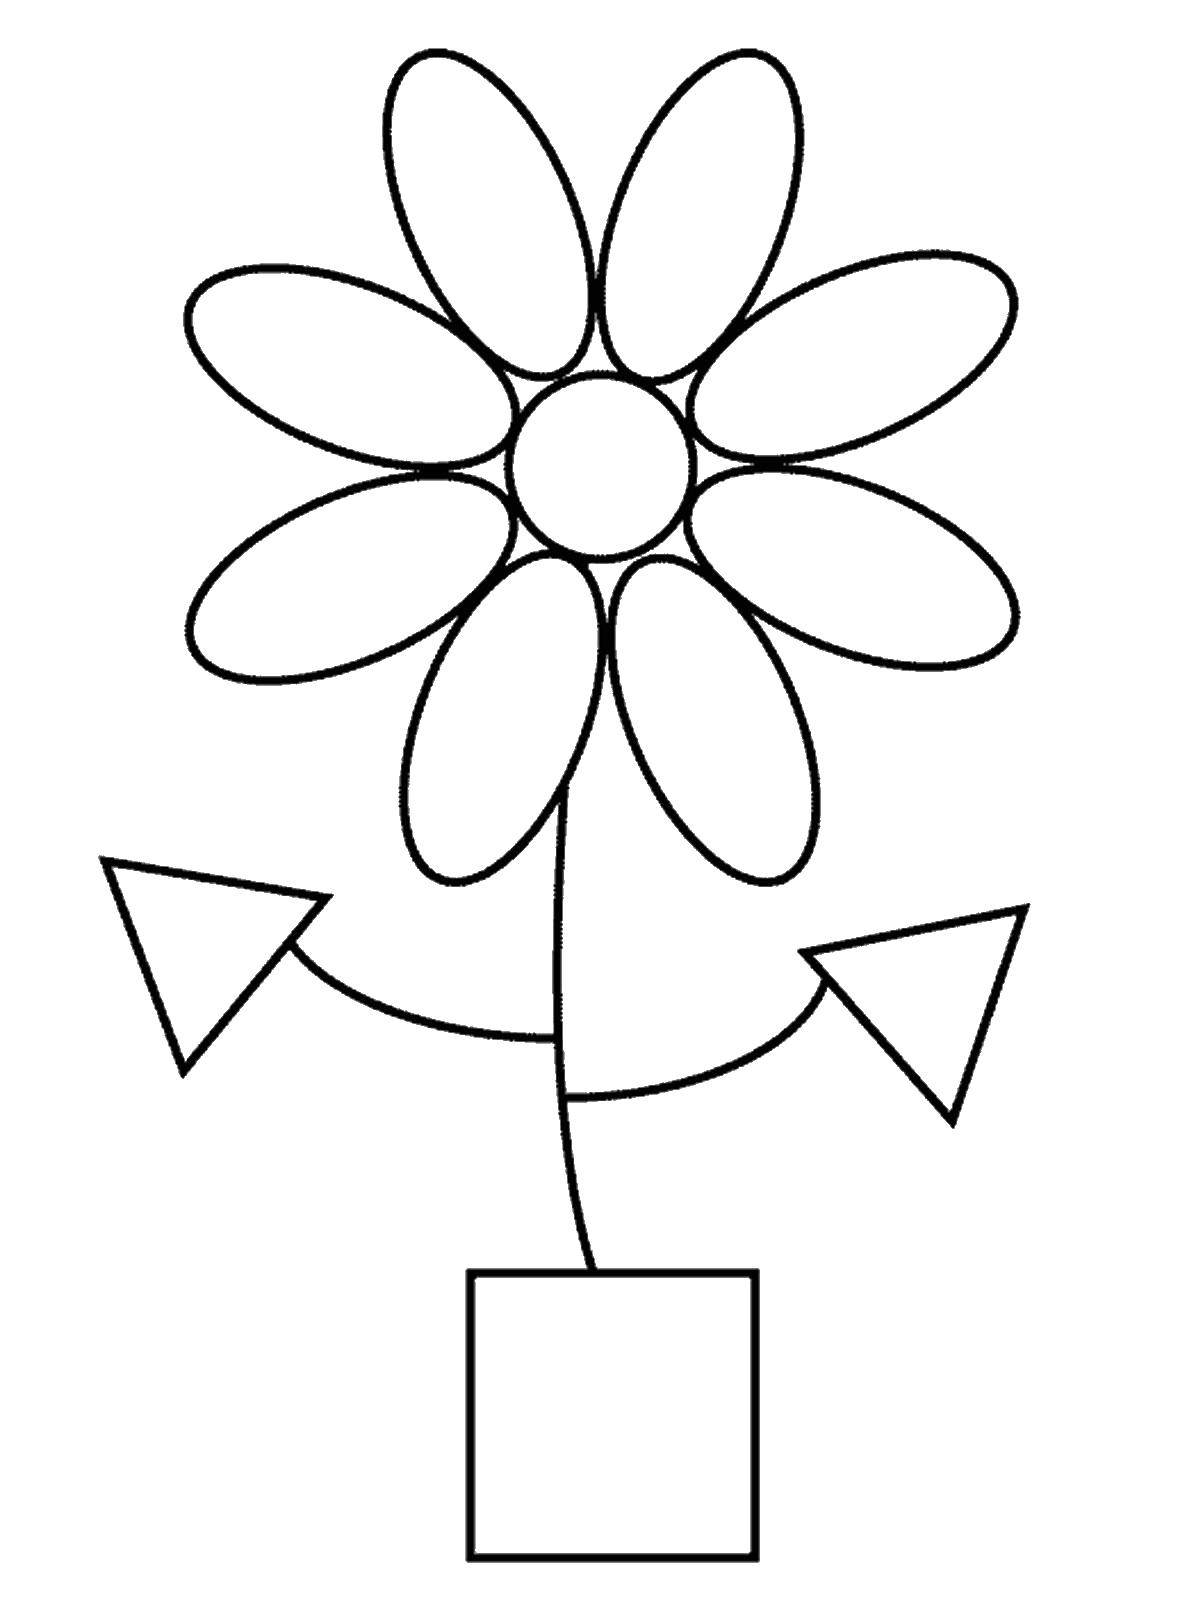 Coloring Daisy figure. Category coloring of the figures. Tags:  shapes.